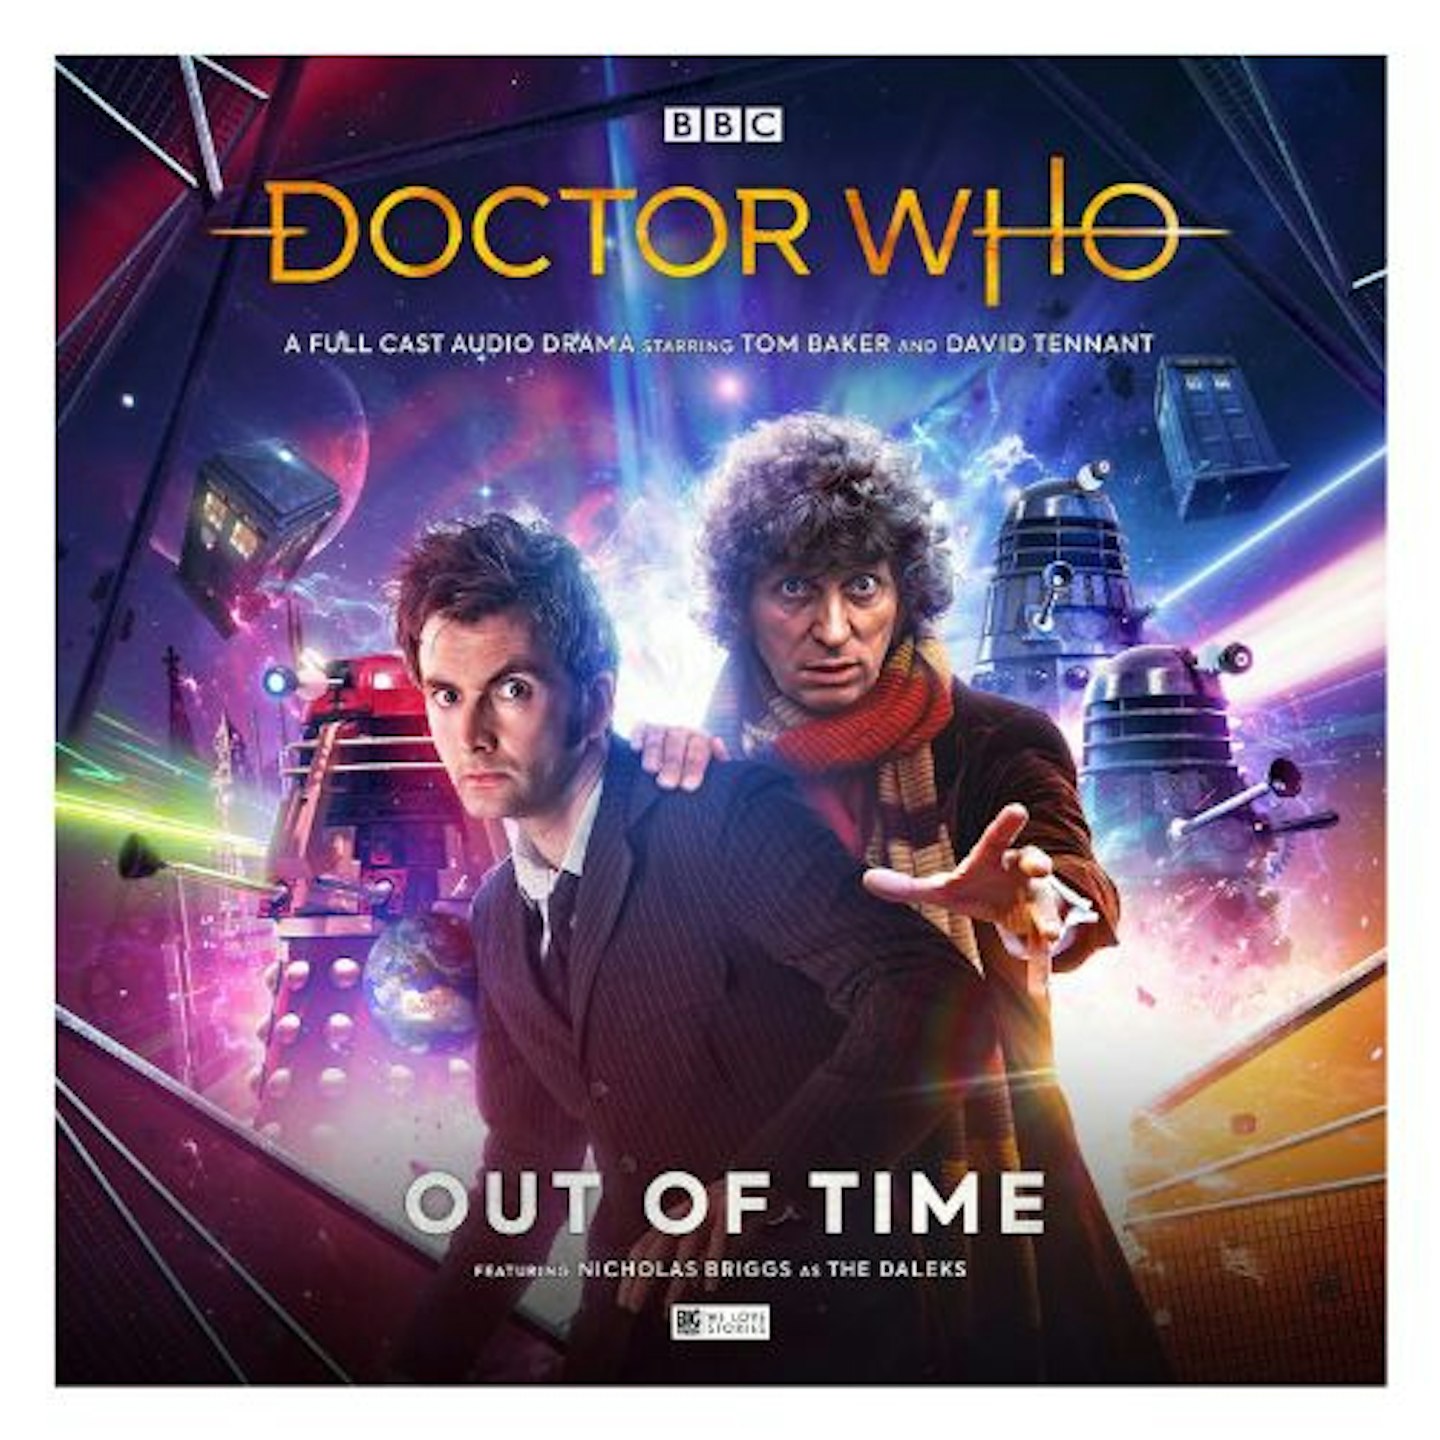 Best Doctor Who audio dramas